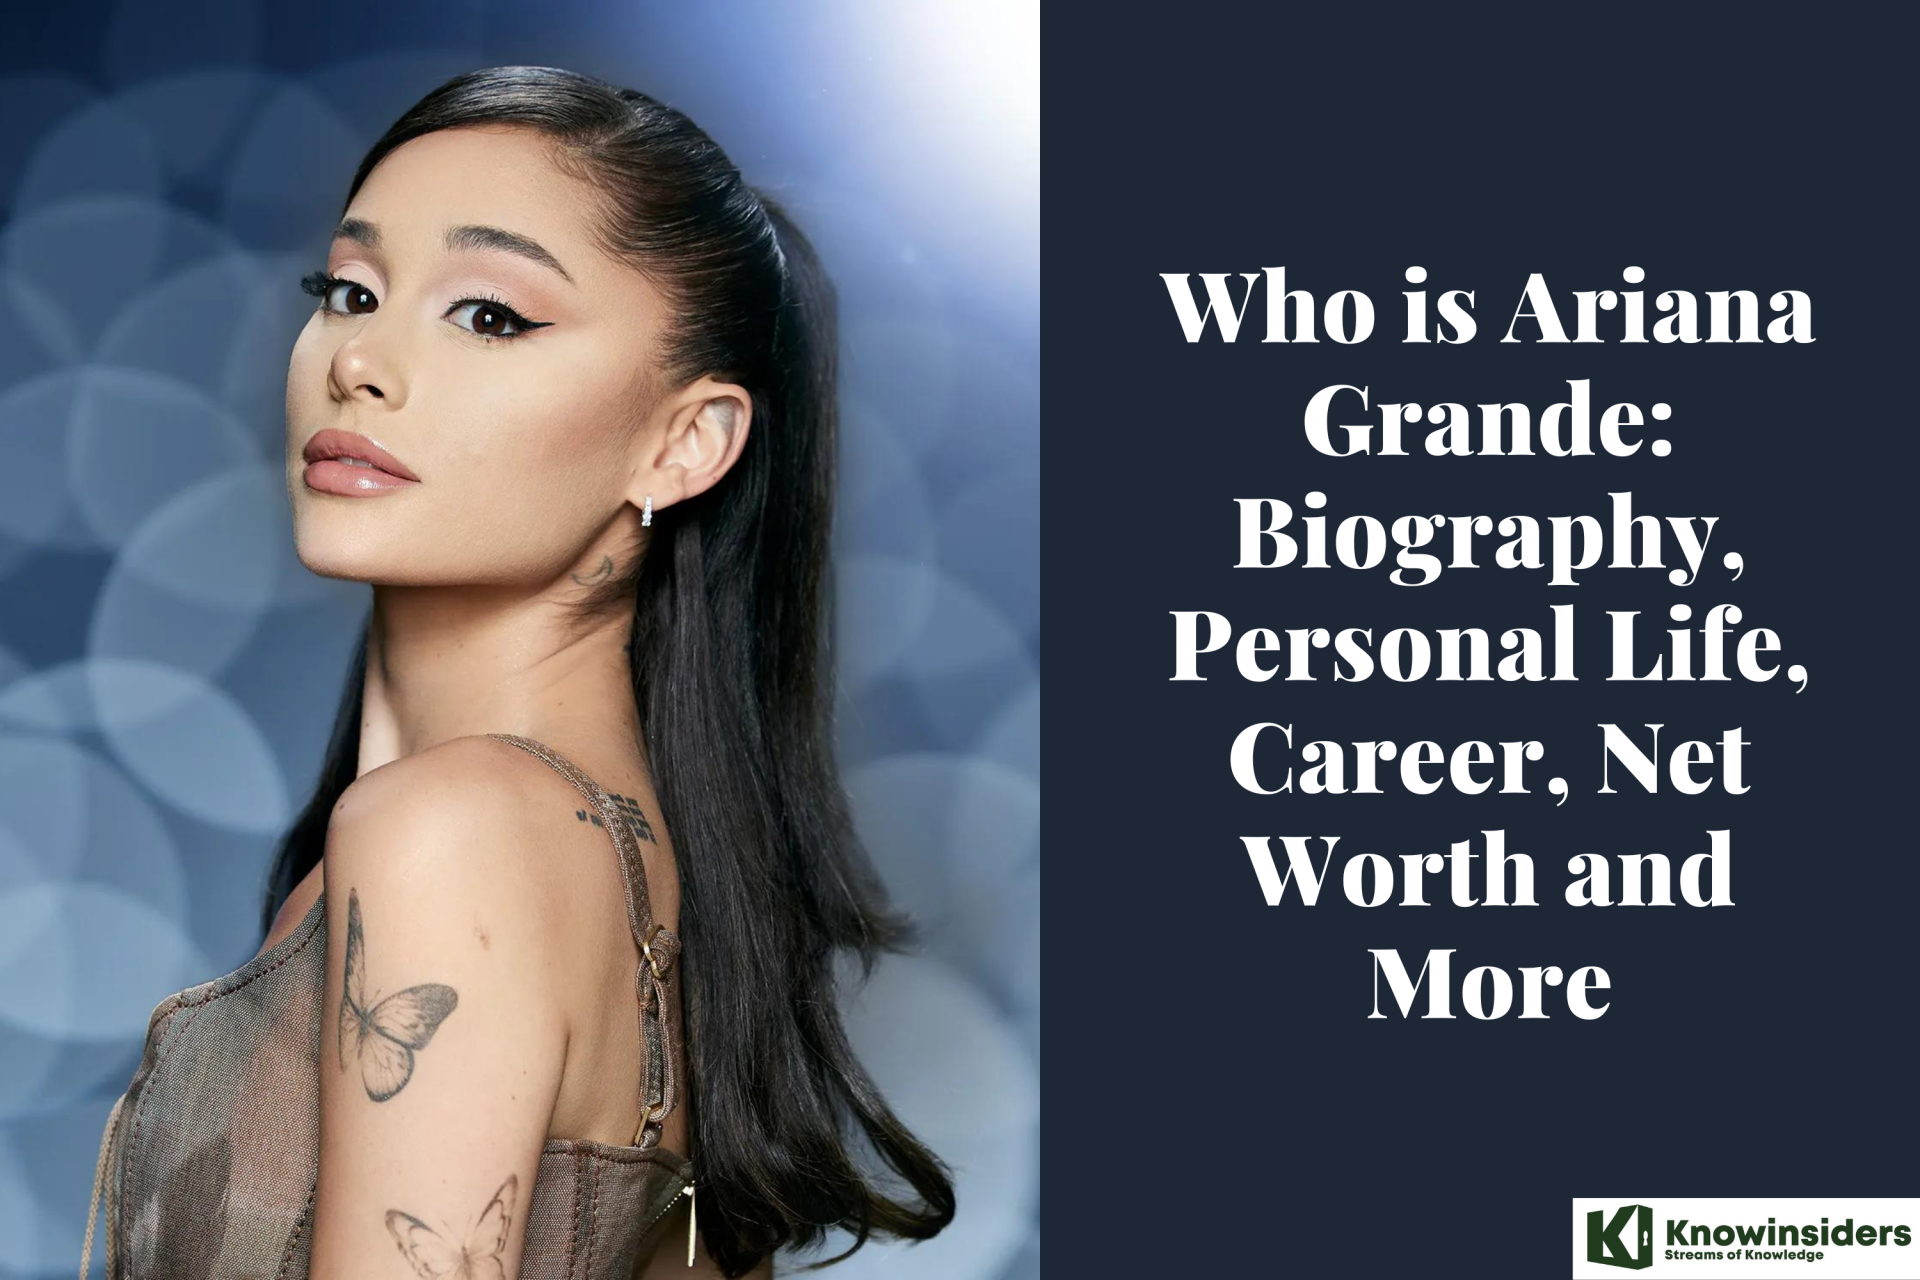 Who is Ariana Grande: Biography, Personal Life, Career, Net Worth and More